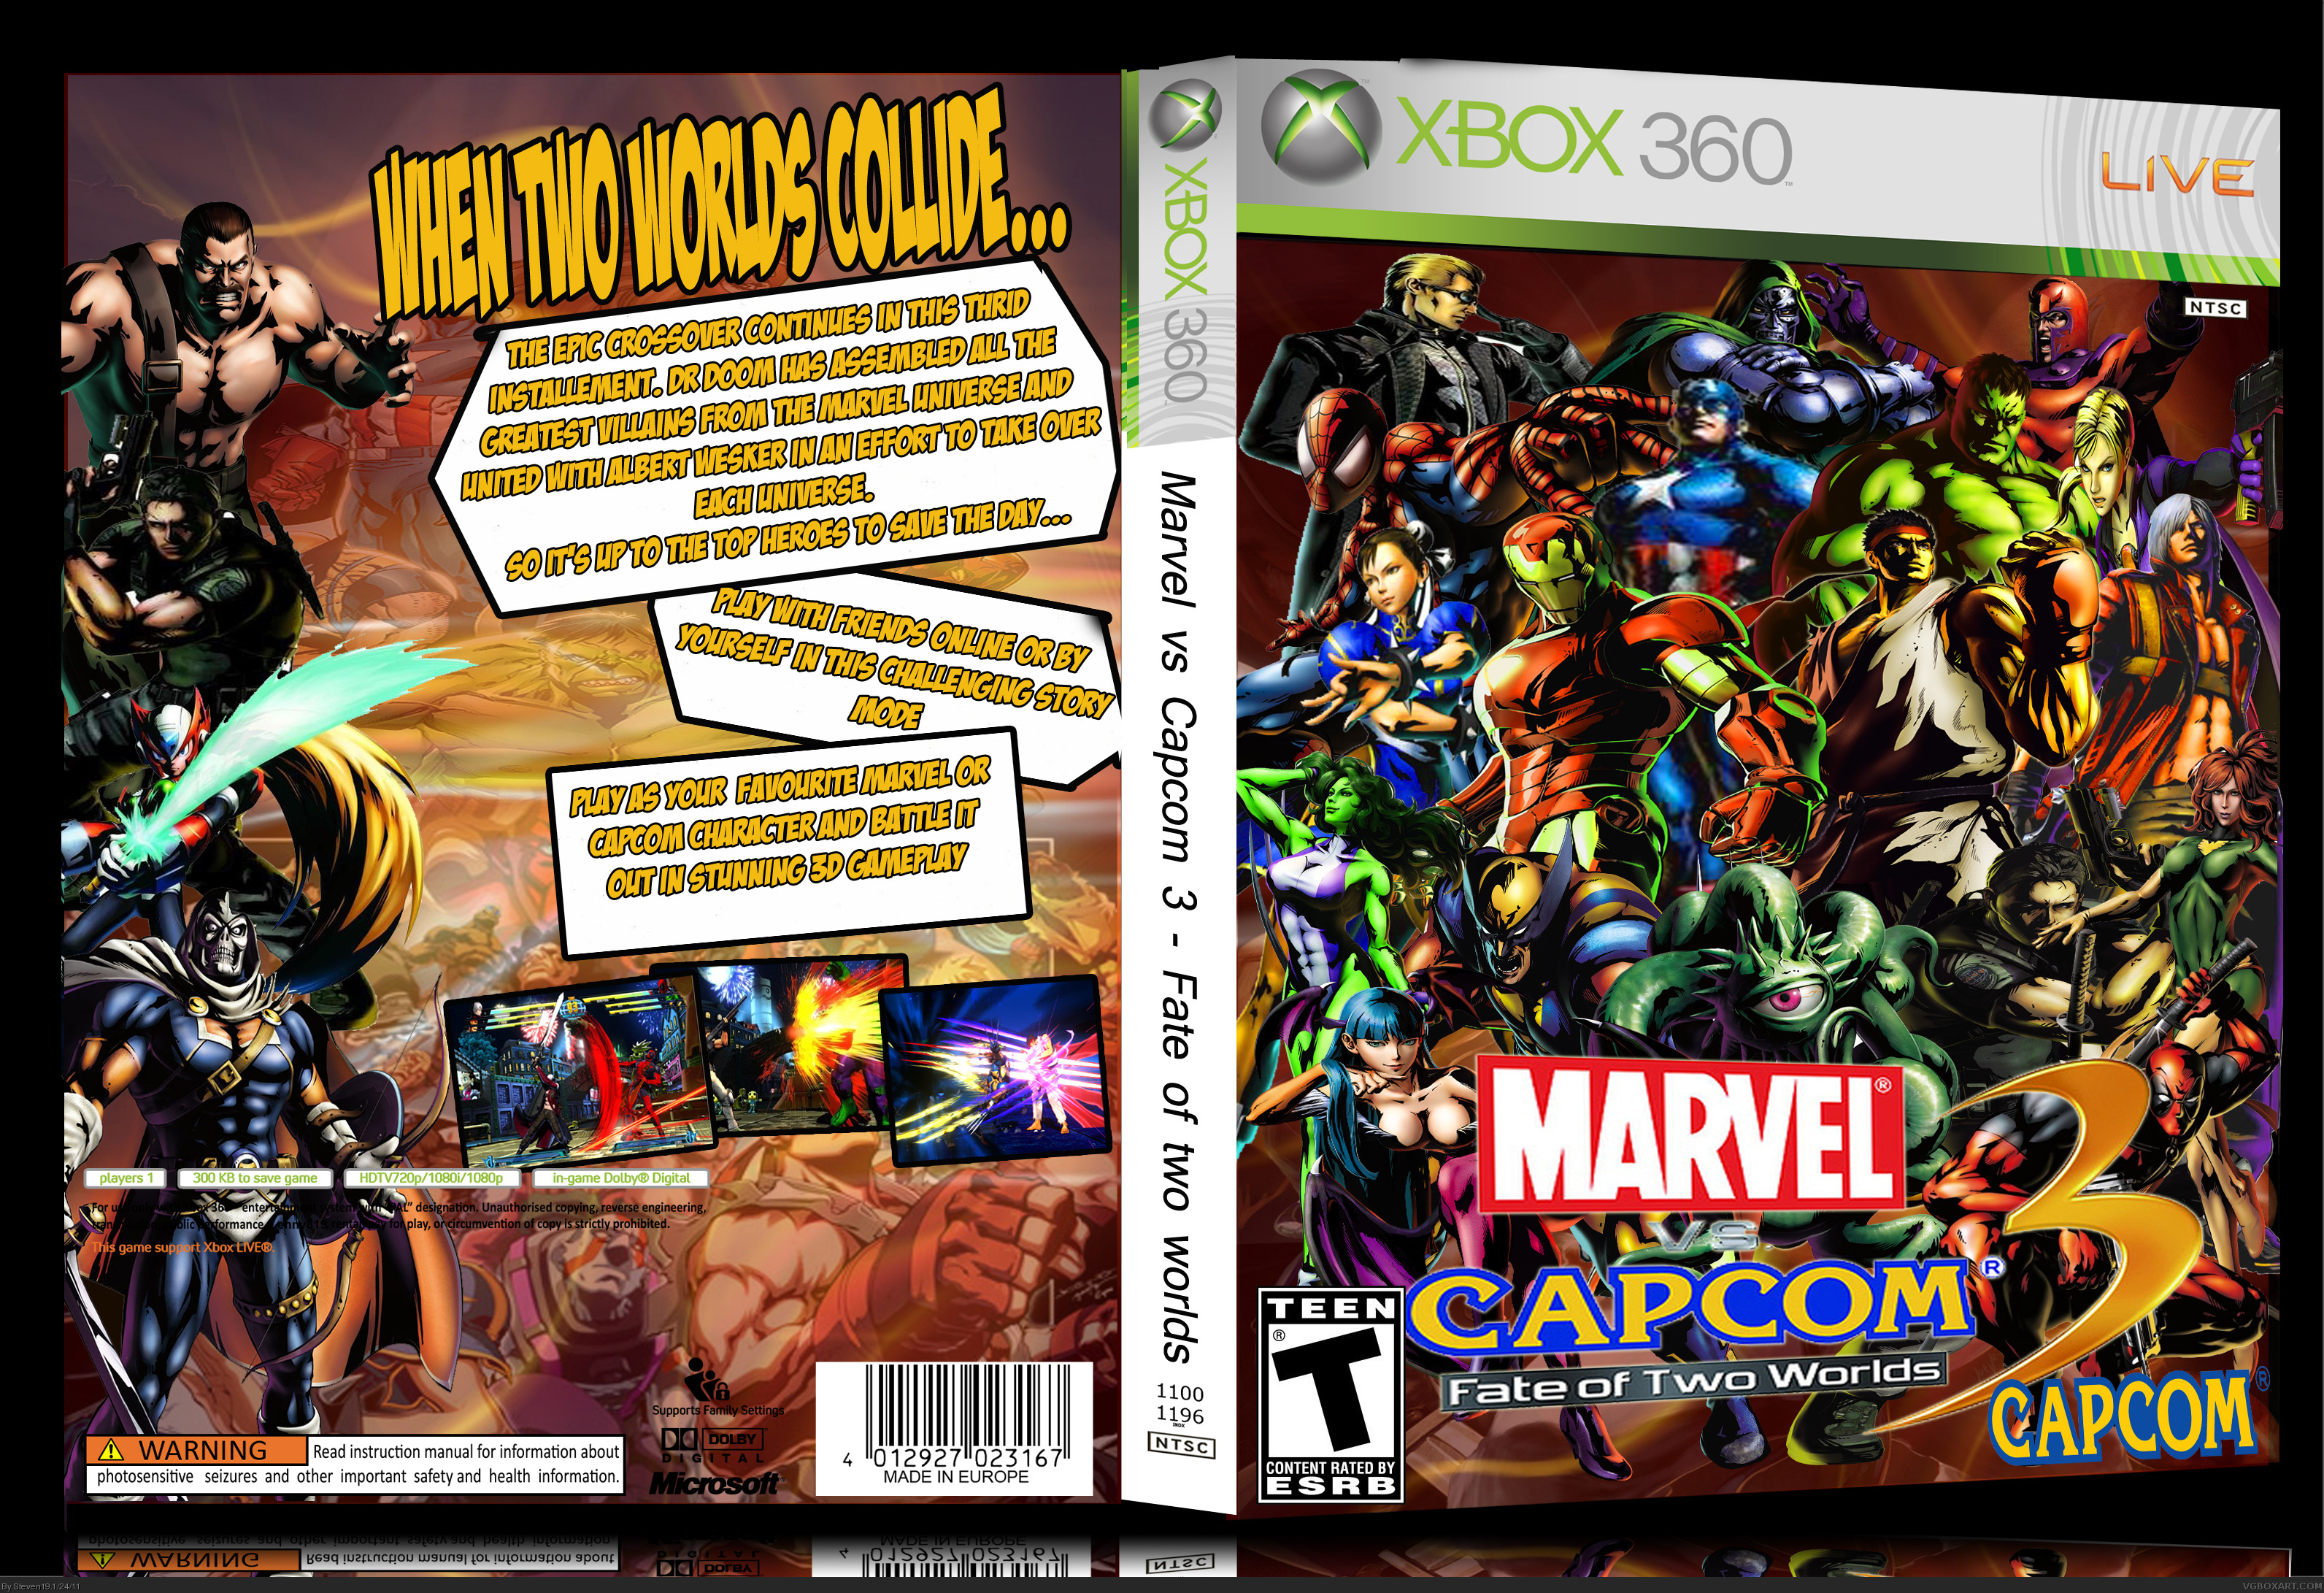 Marvel vs. Capcom 3: Fate of Two Worlds box cover